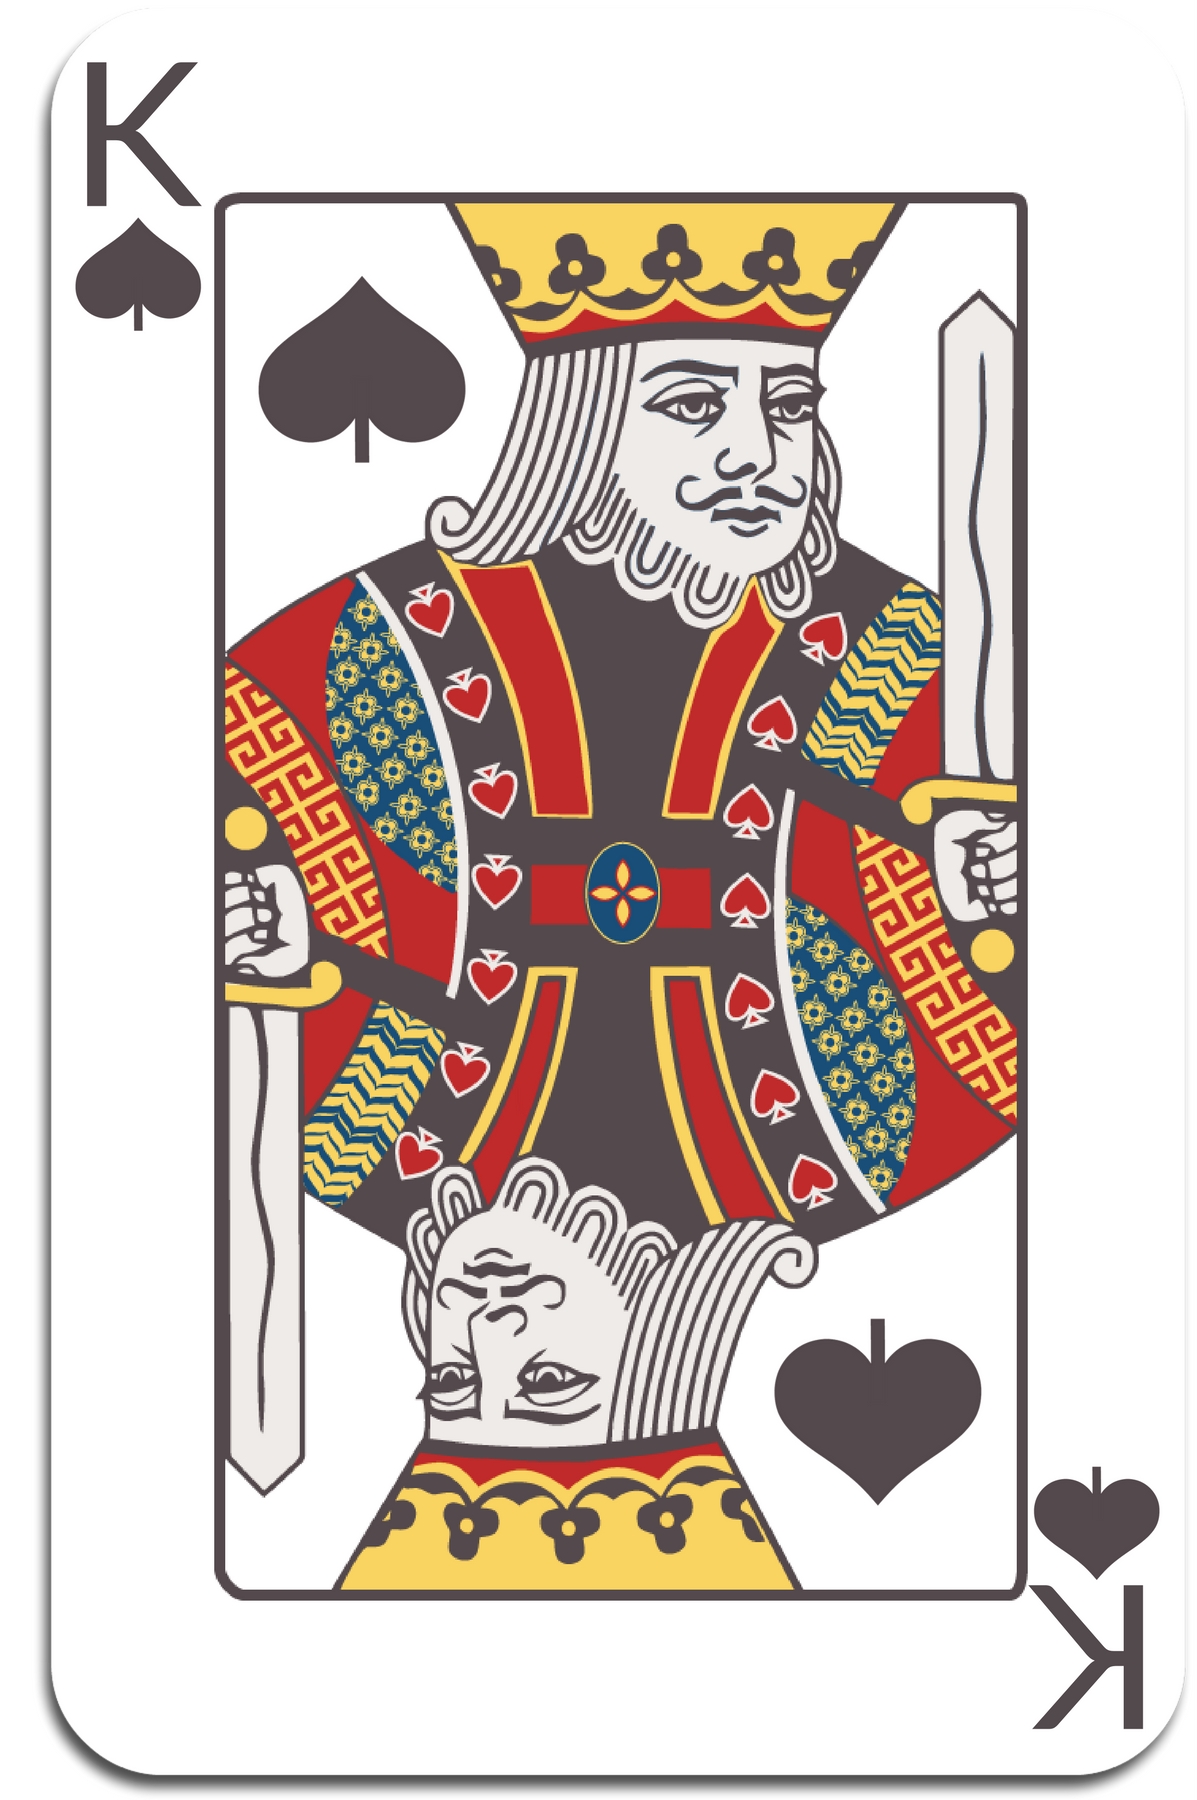 King of Spades Player's Guide